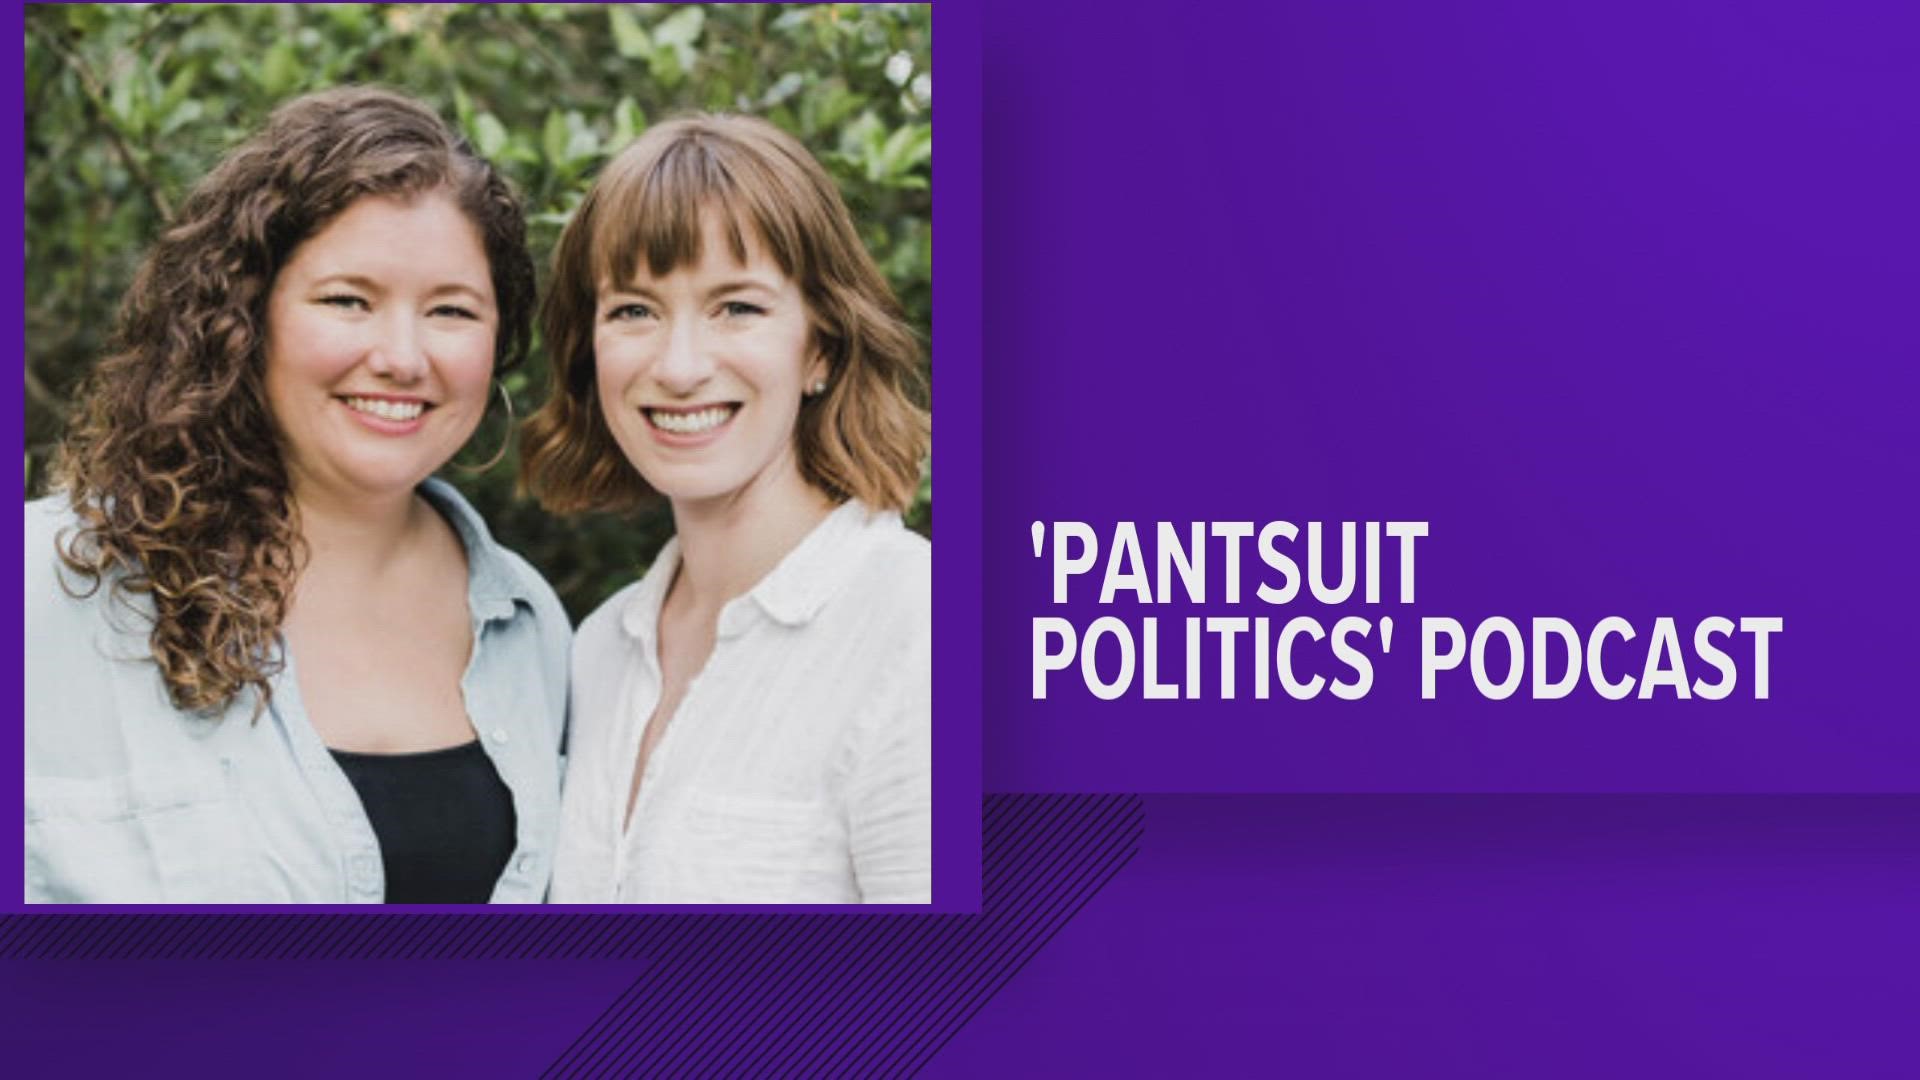 The hosts of a podcast called "Pantsuit Politics" look to help people that have grace-filled political conversations. They will speak at Maryville College on Feb. 7.